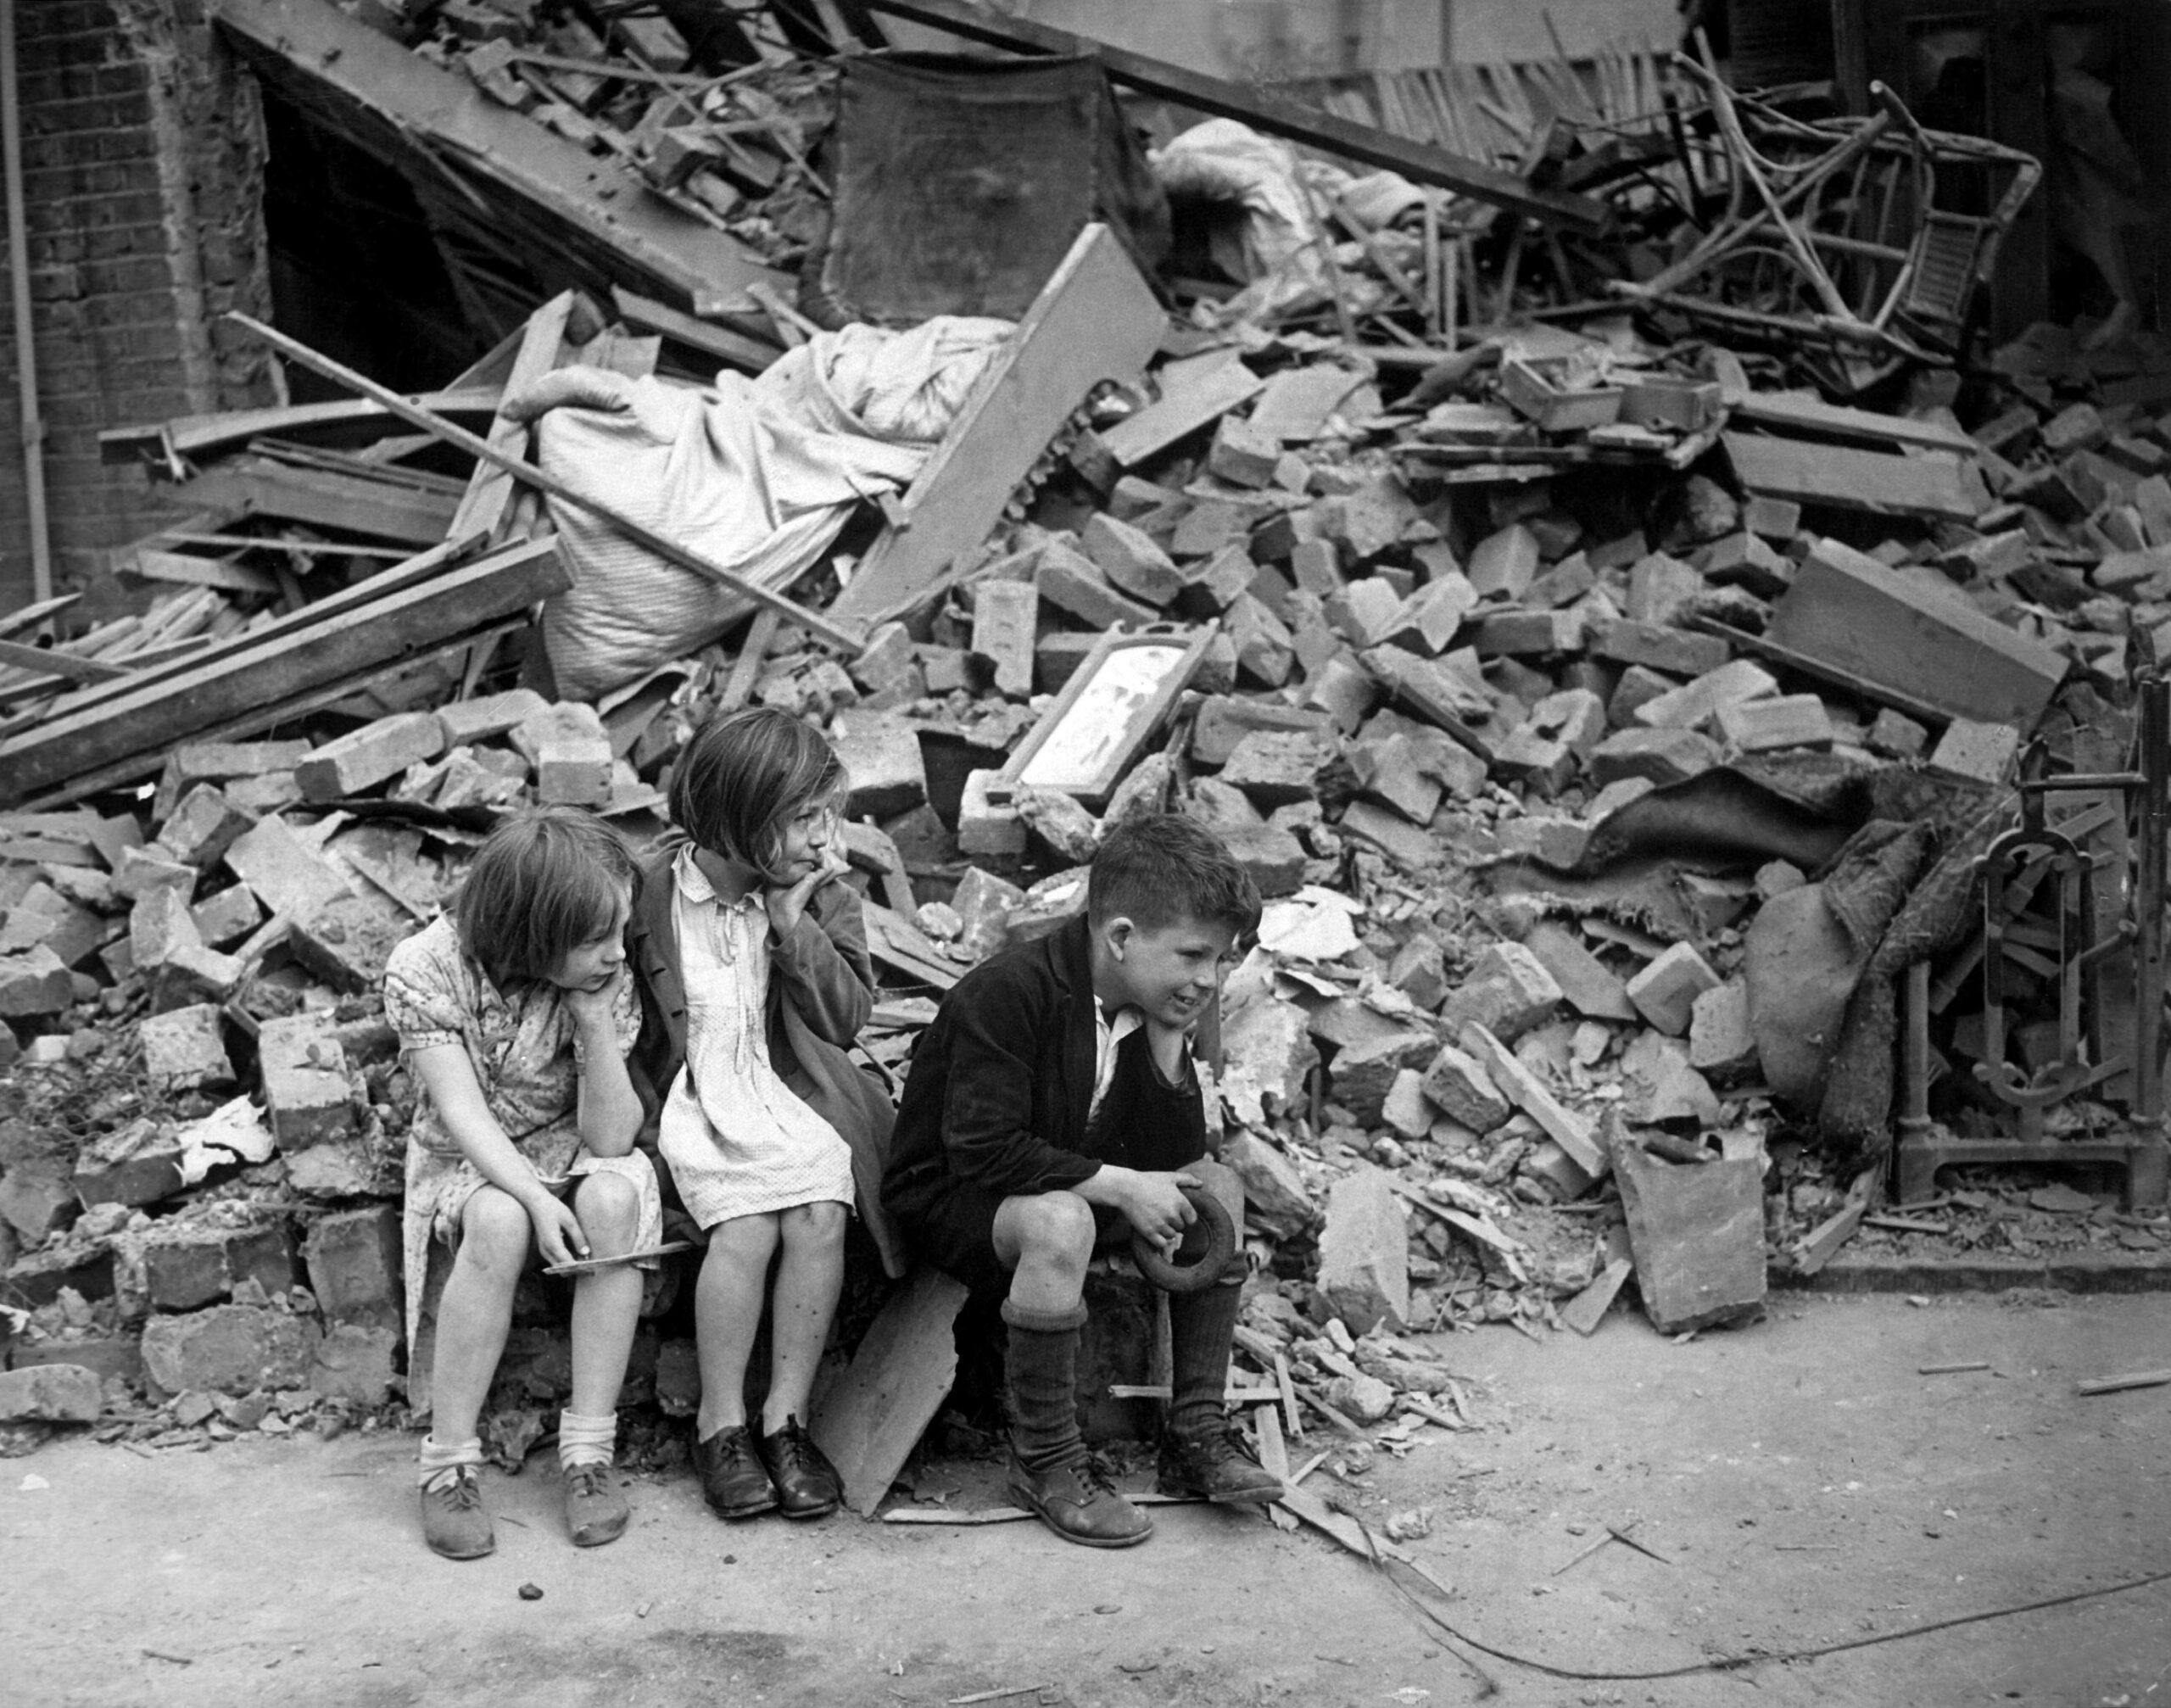 Children of an eastern suburb of London, who have been made homeless by the random bombs of the Nazi night raiders, waiting outside the wreckage of what was their home. September 1940. New Times Paris Bureau Collection. (USIA)<br /> Exact Date Shot Unknown<br /> NARA FILE #: 306-NT-3163V<br /> WAR & CONFLICT BOOK #: 1009